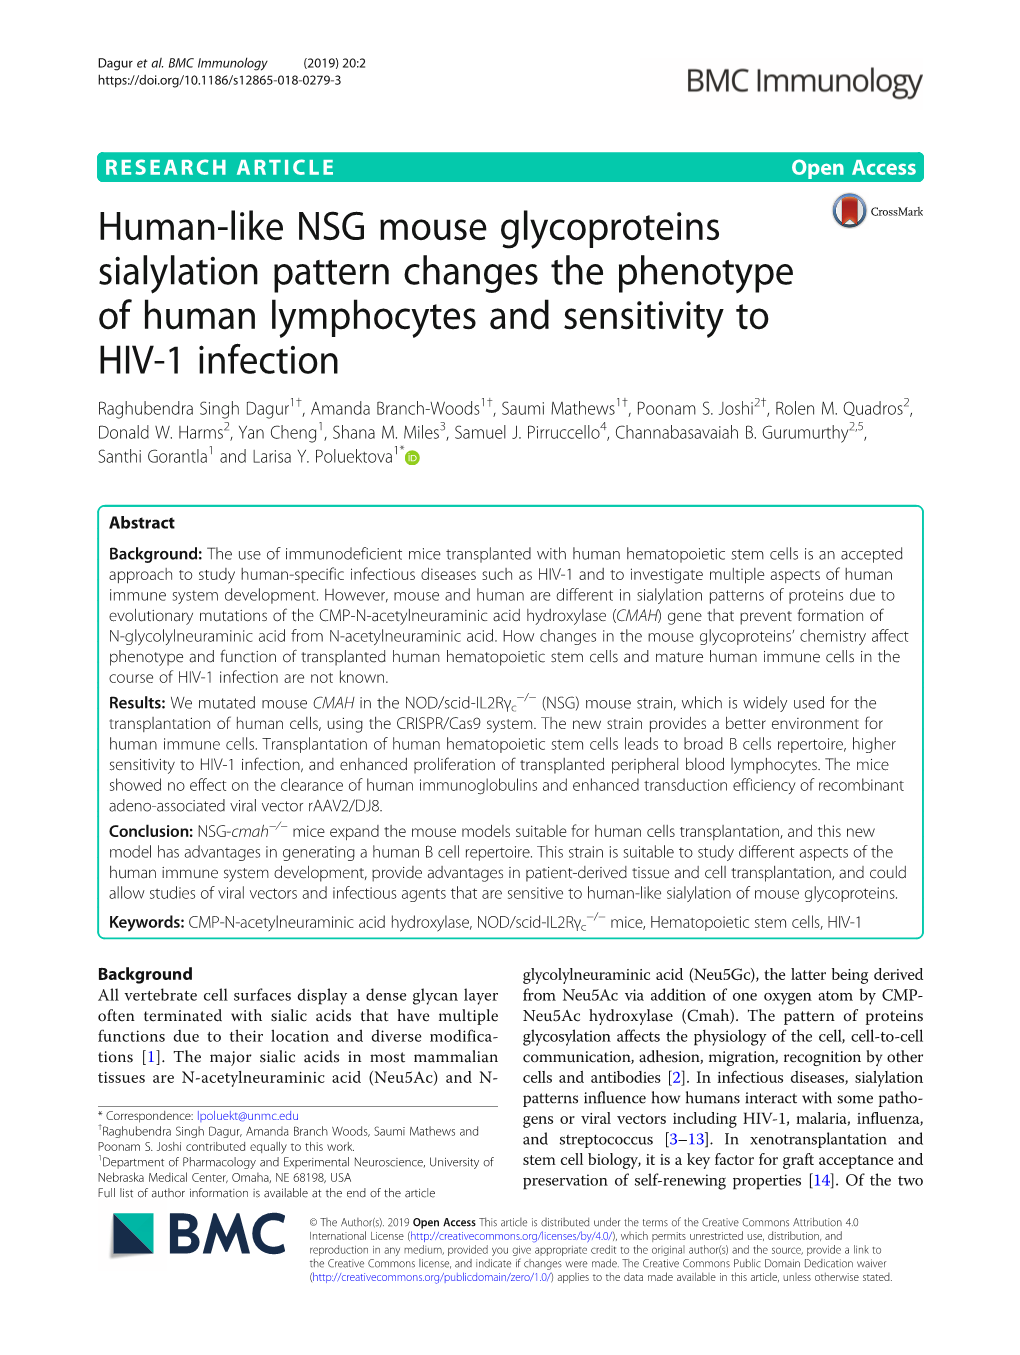 Human-Like NSG Mouse Glycoproteins Sialylation Pattern Changes The